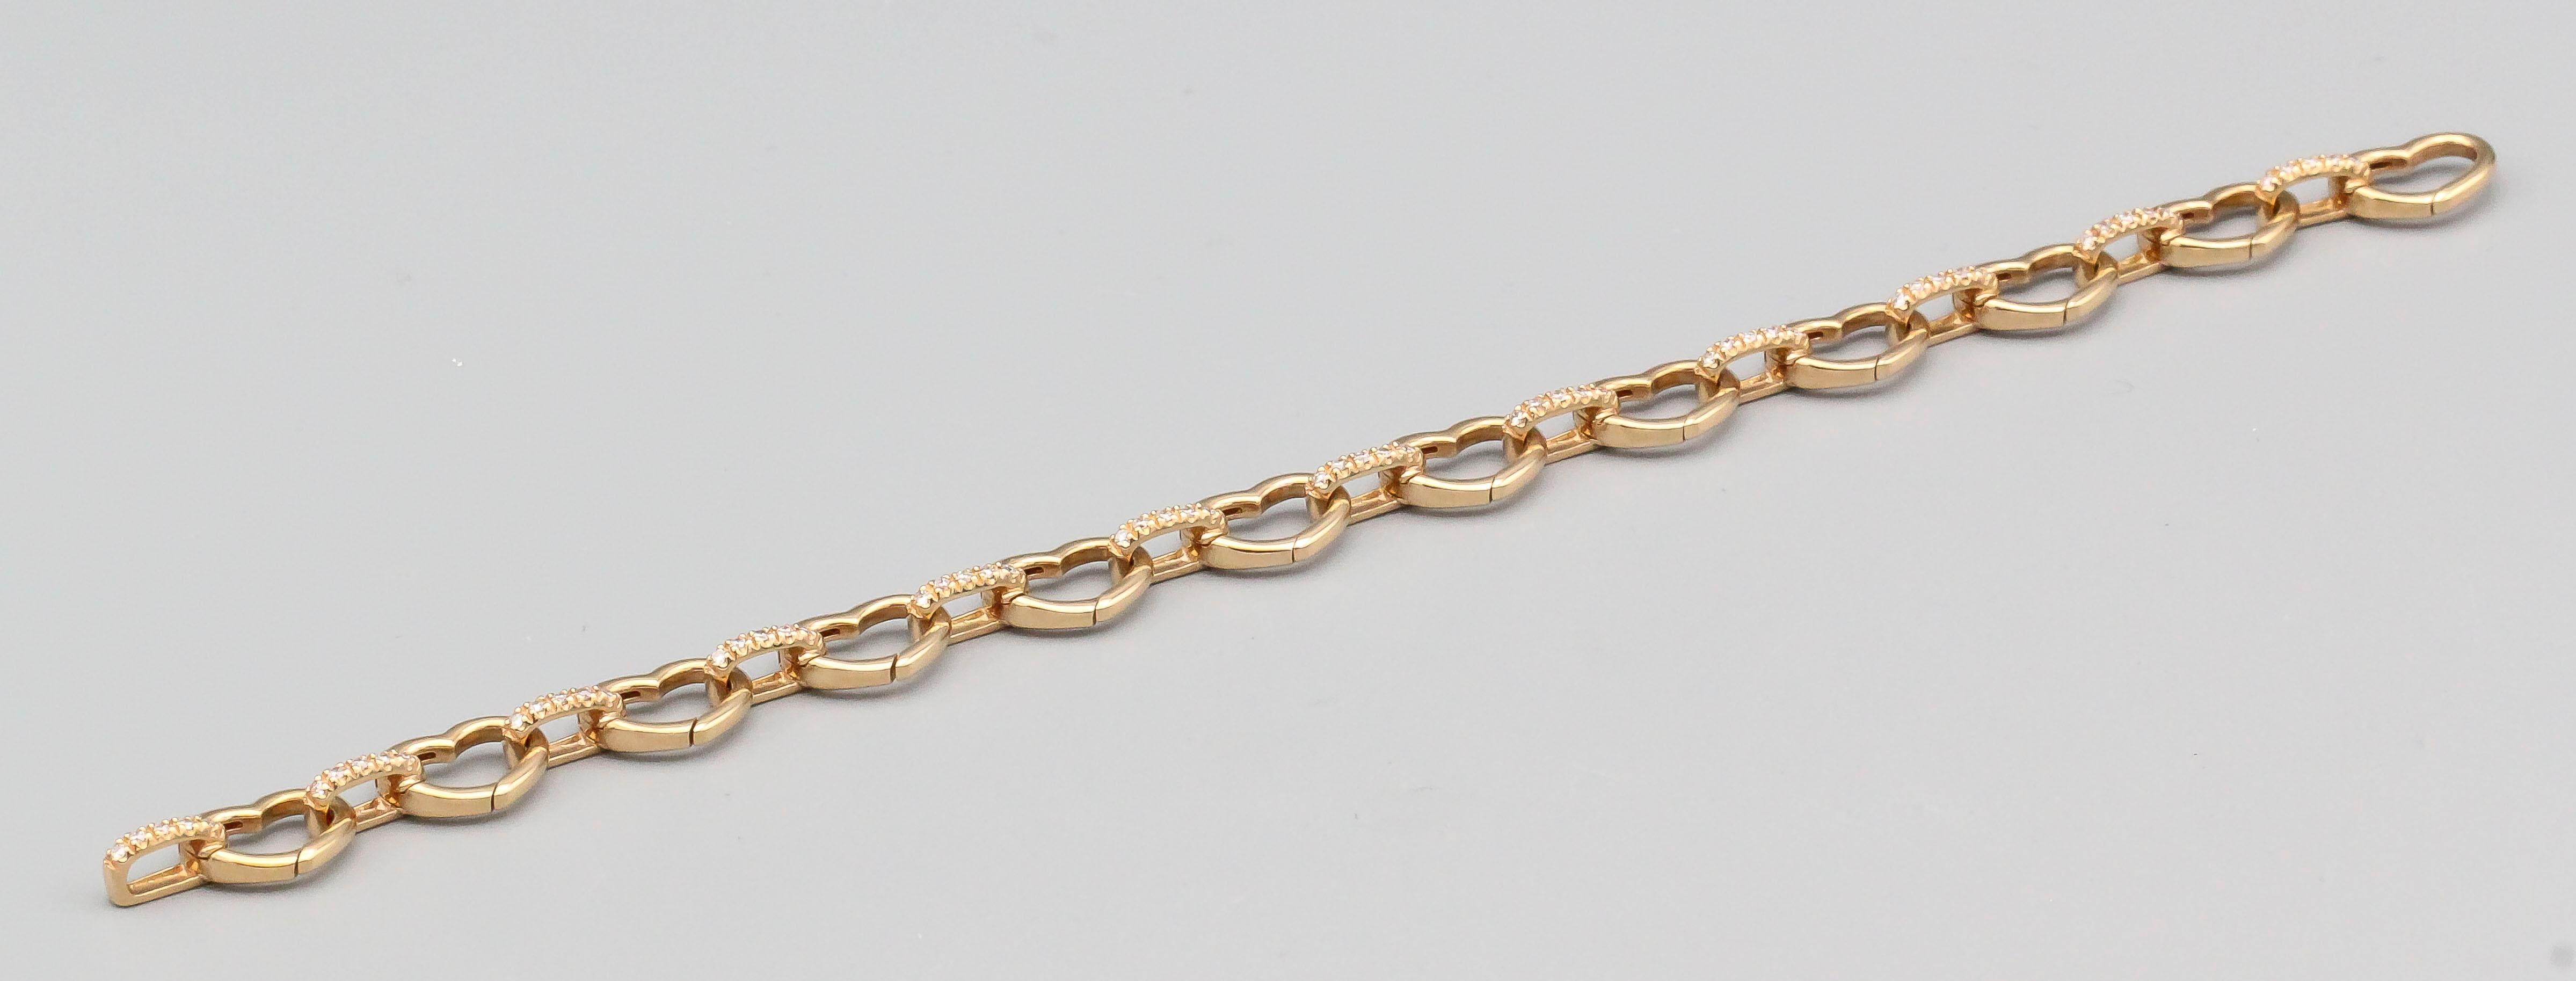 Fine diamond and 18K rose gold heart bracelet for charm by Aaron Basha.  Charms can be added by pushing in the spring lever on the hearts, allowing addition and removal of charms easily.  This is the smaller of the two sizes and current retail price